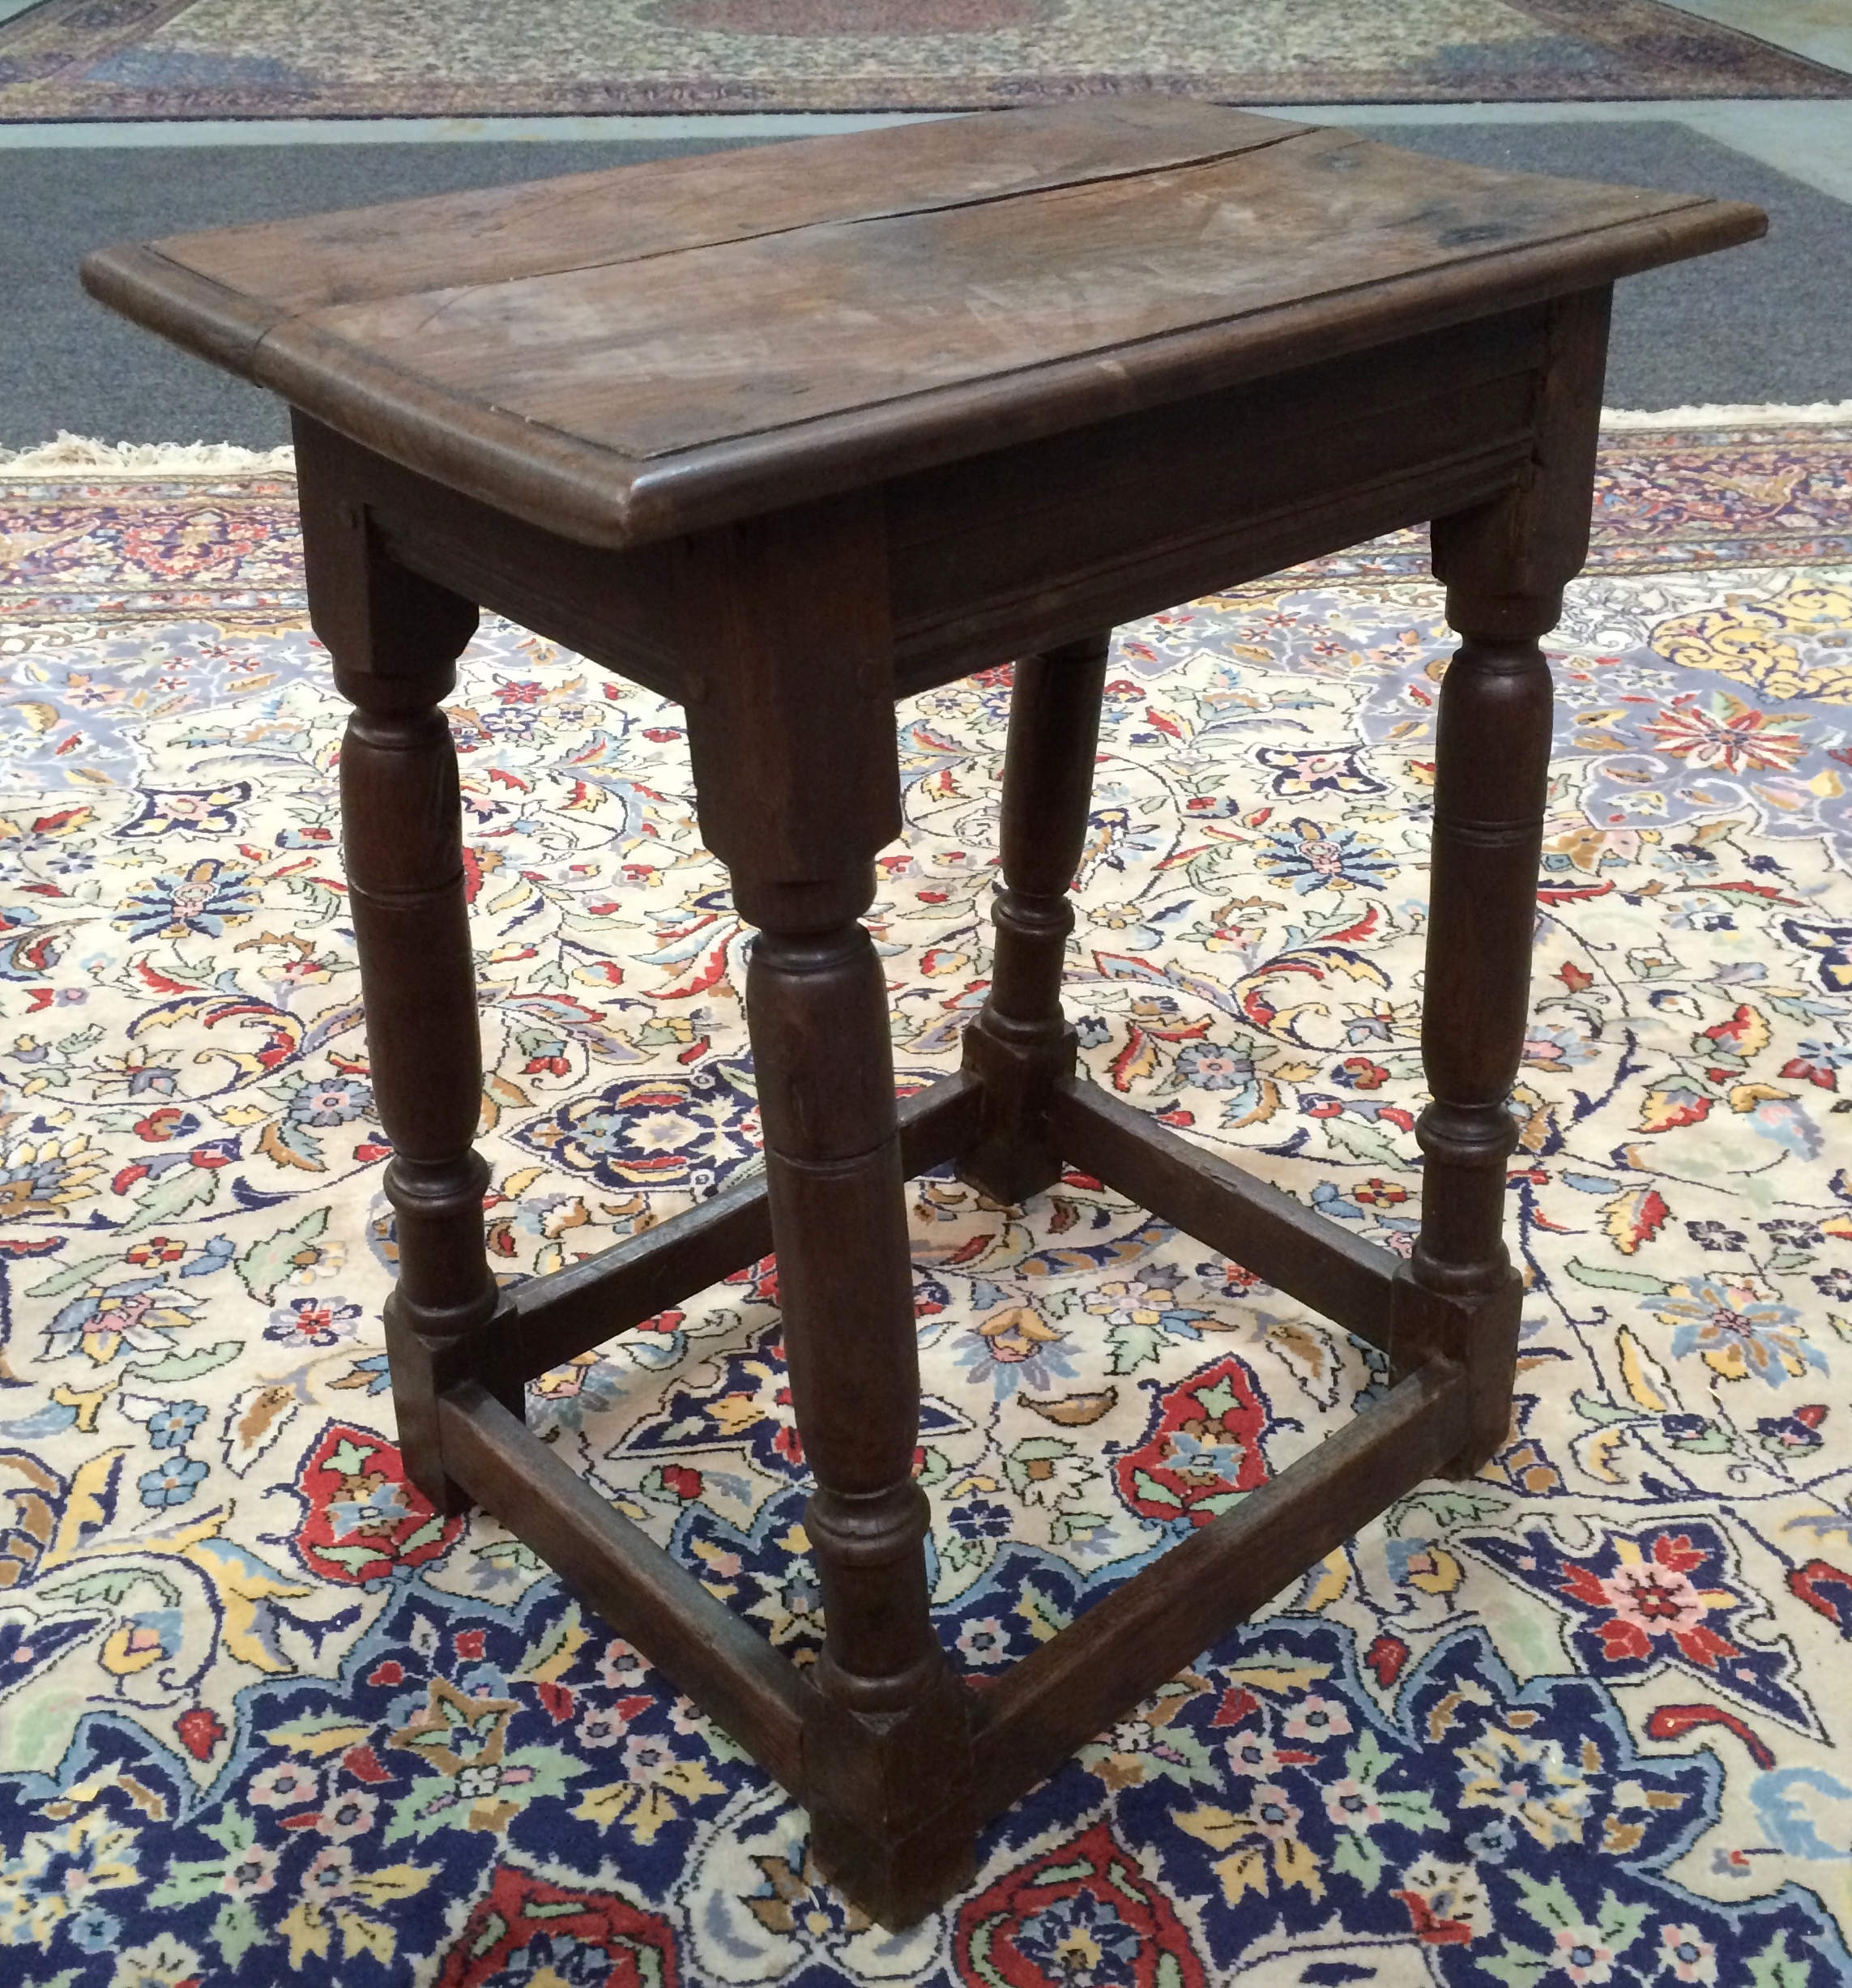 A late 17th to early 18th Century oak joint stool,